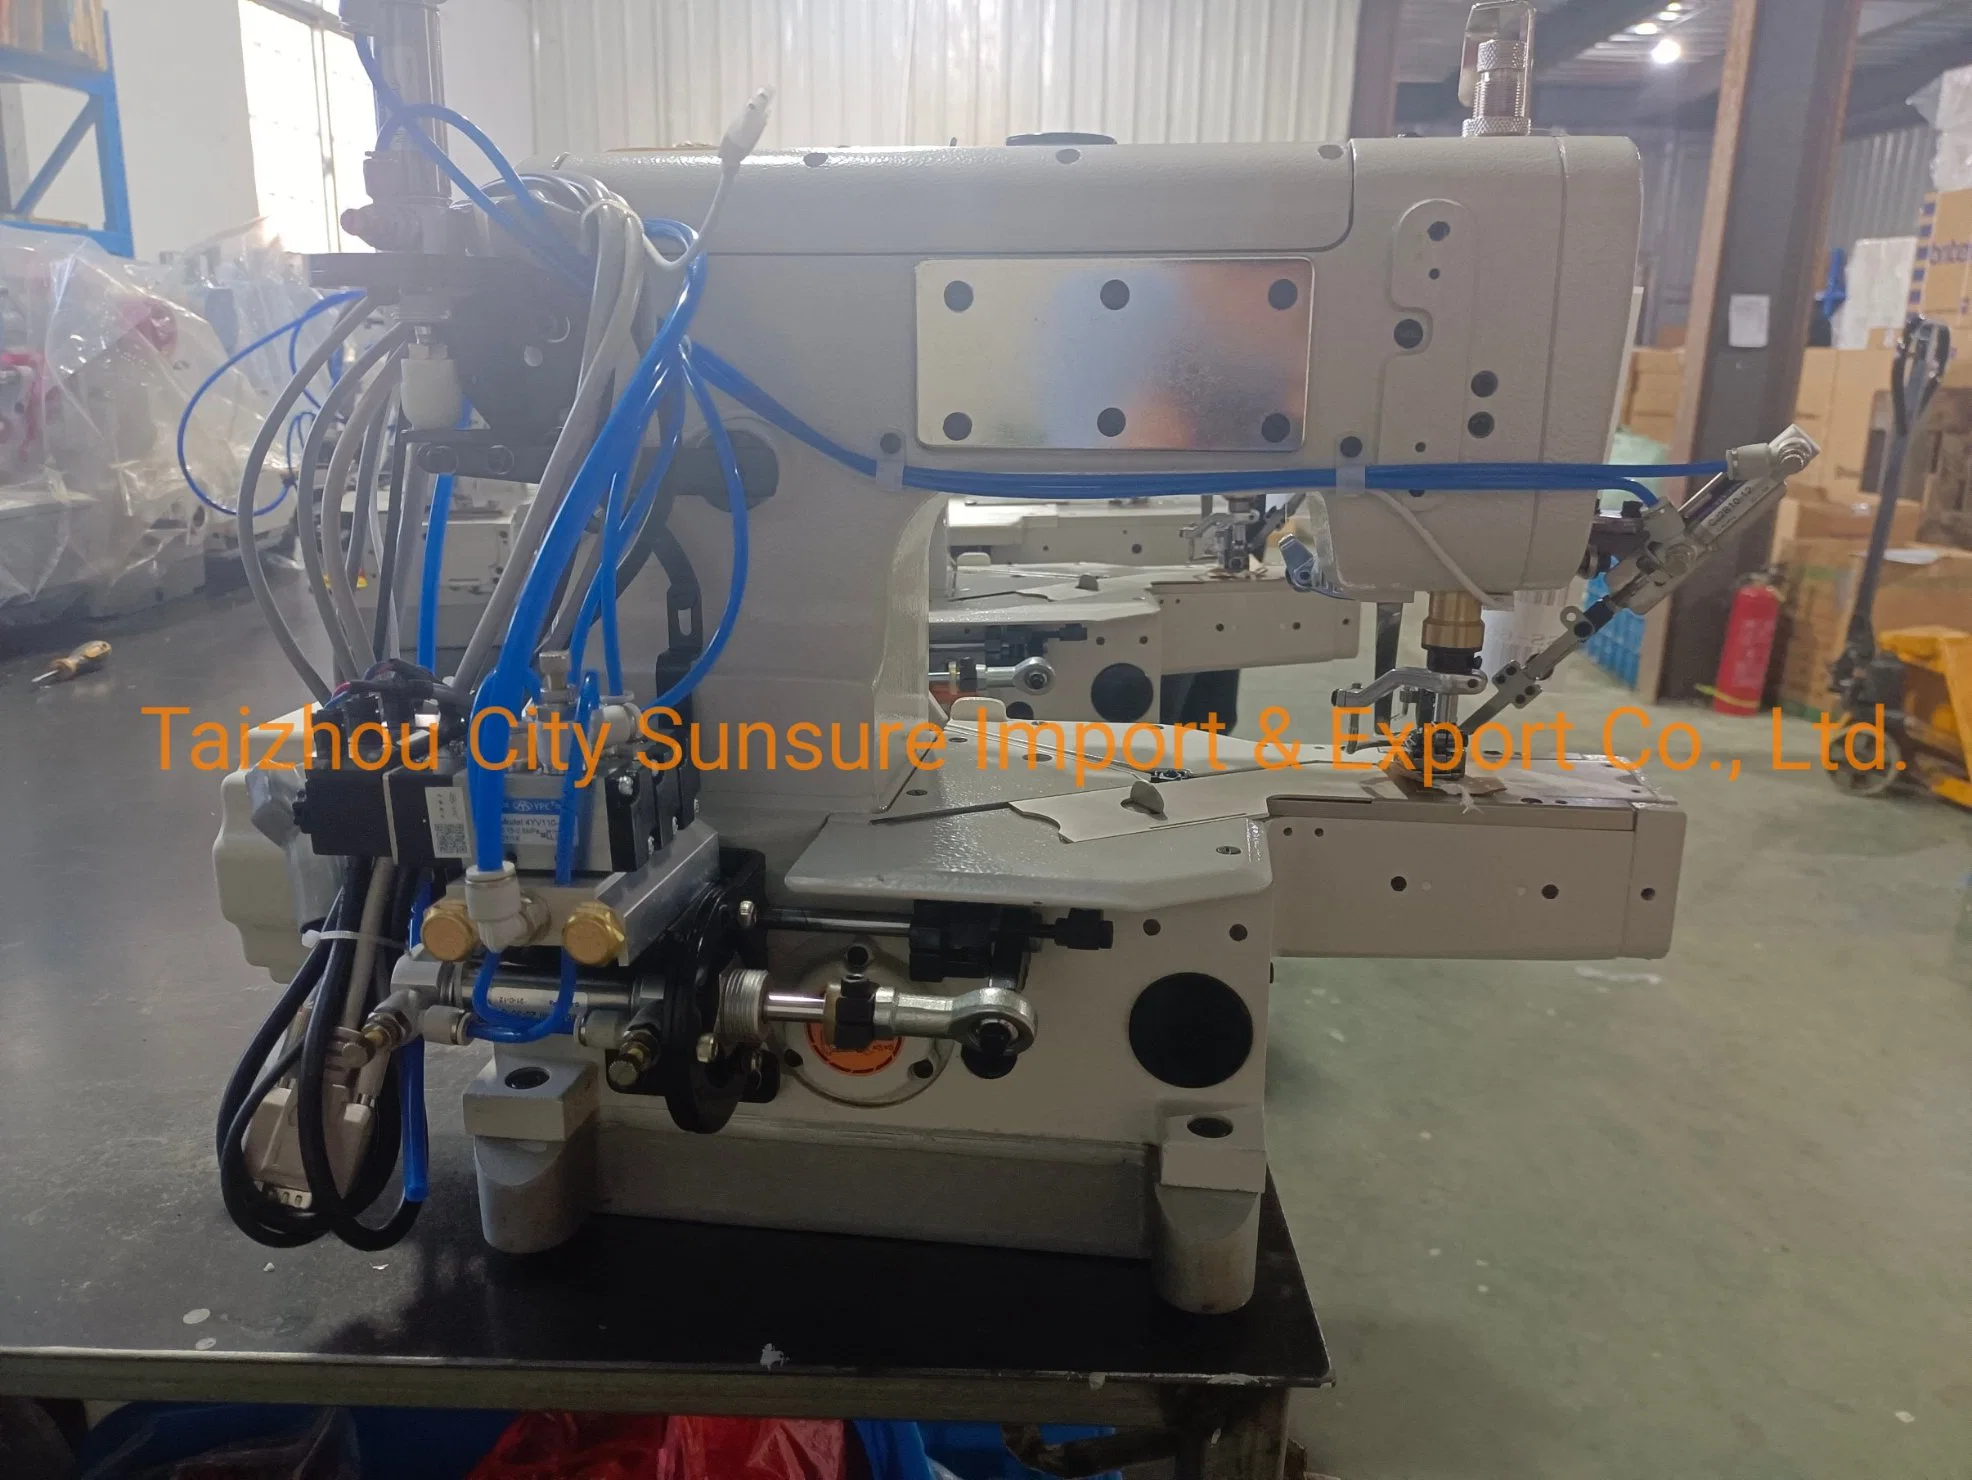 Direct Drive High-Speed Cylinder Bed Interlock Sewing Machine with Auto Trimming Function Ss-600-01da